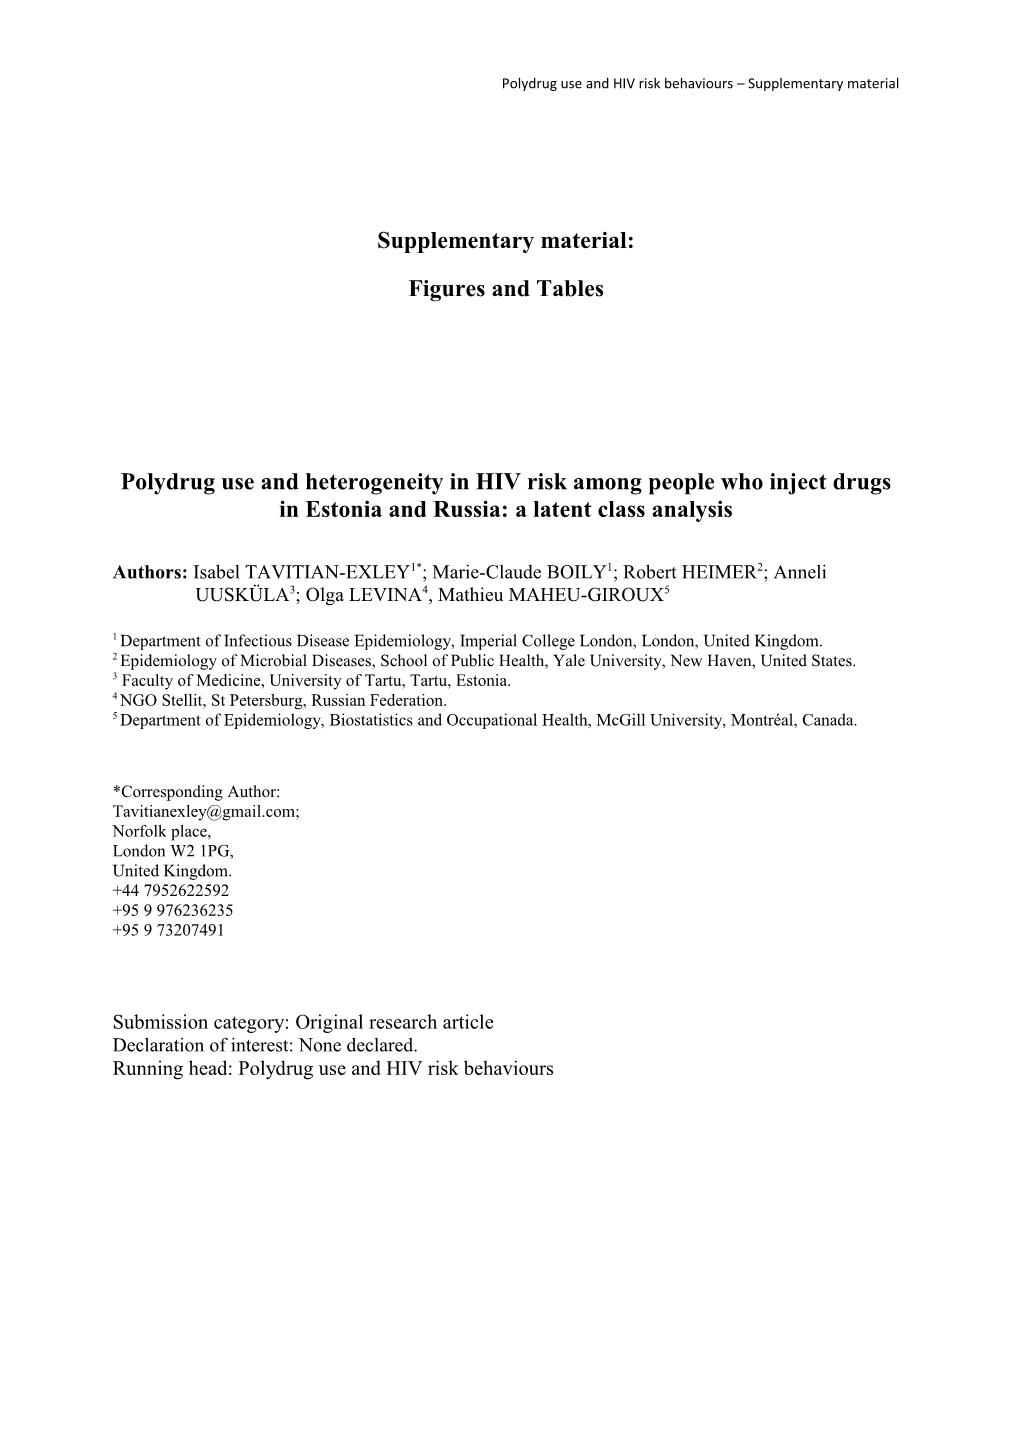 Polydrug Use and HIV Risk Behaviours Supplementary Material